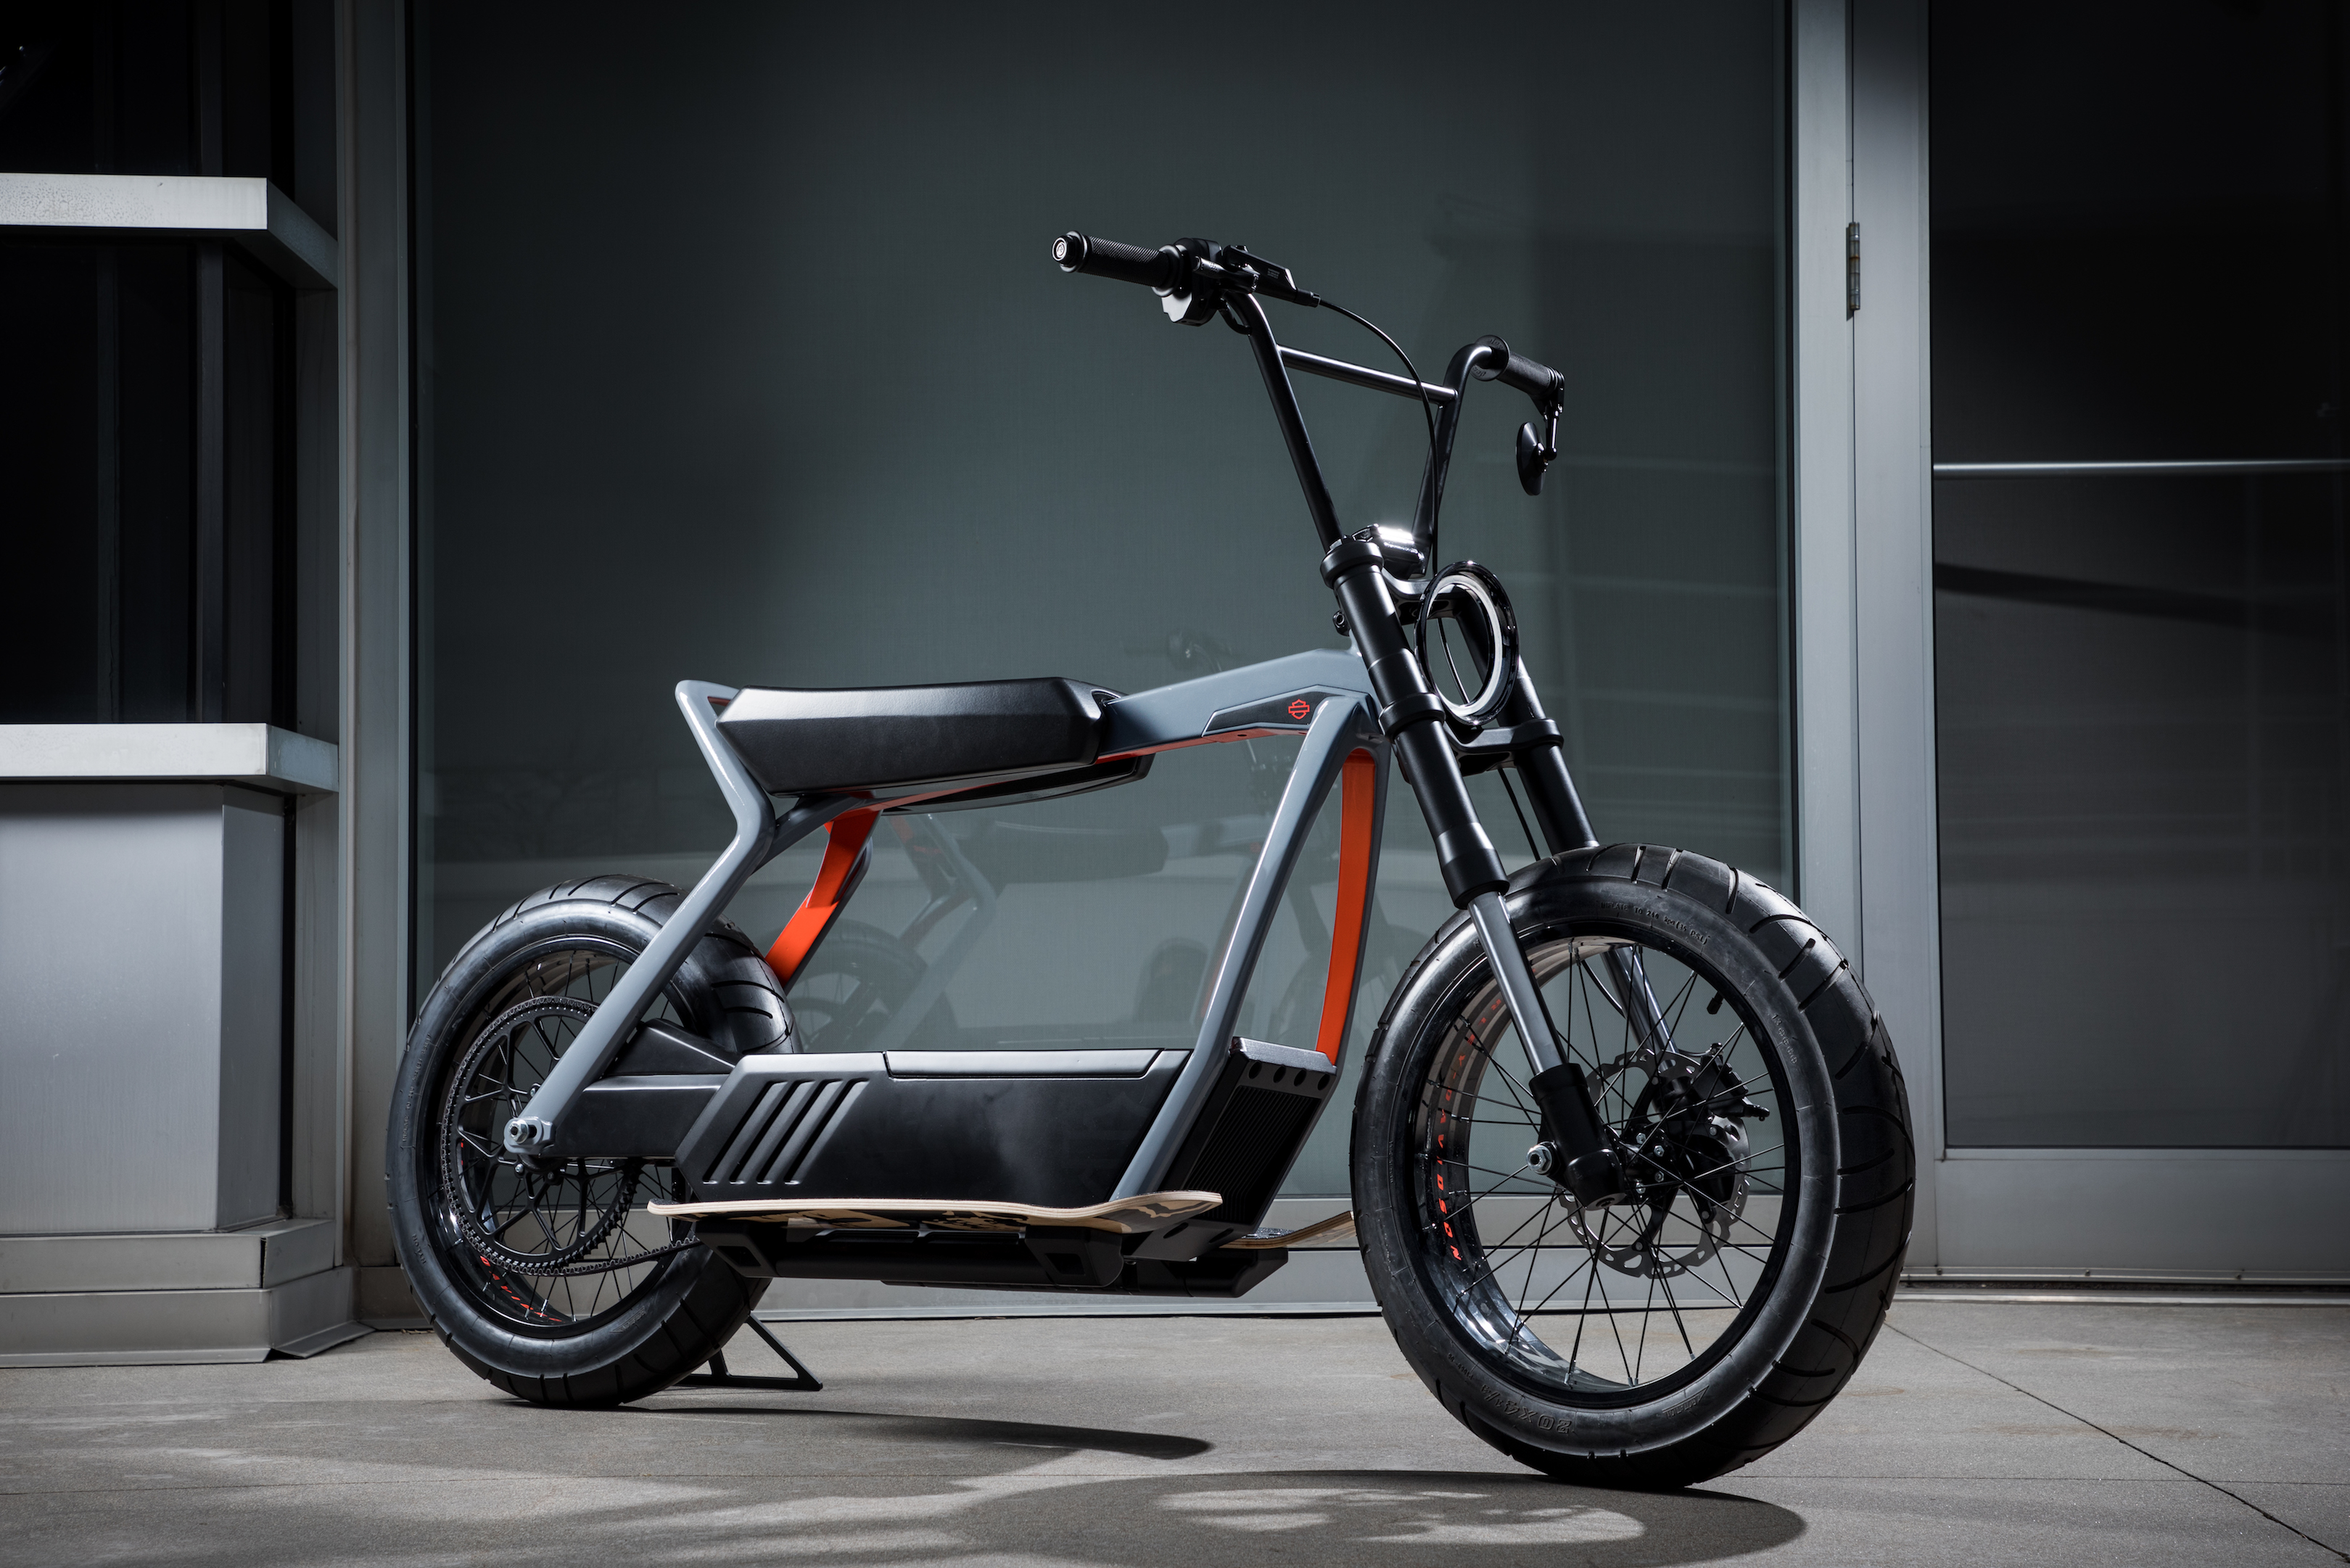 Harley Davidson Reveals More About Its Push Into Electric Vehicles Techcrunch